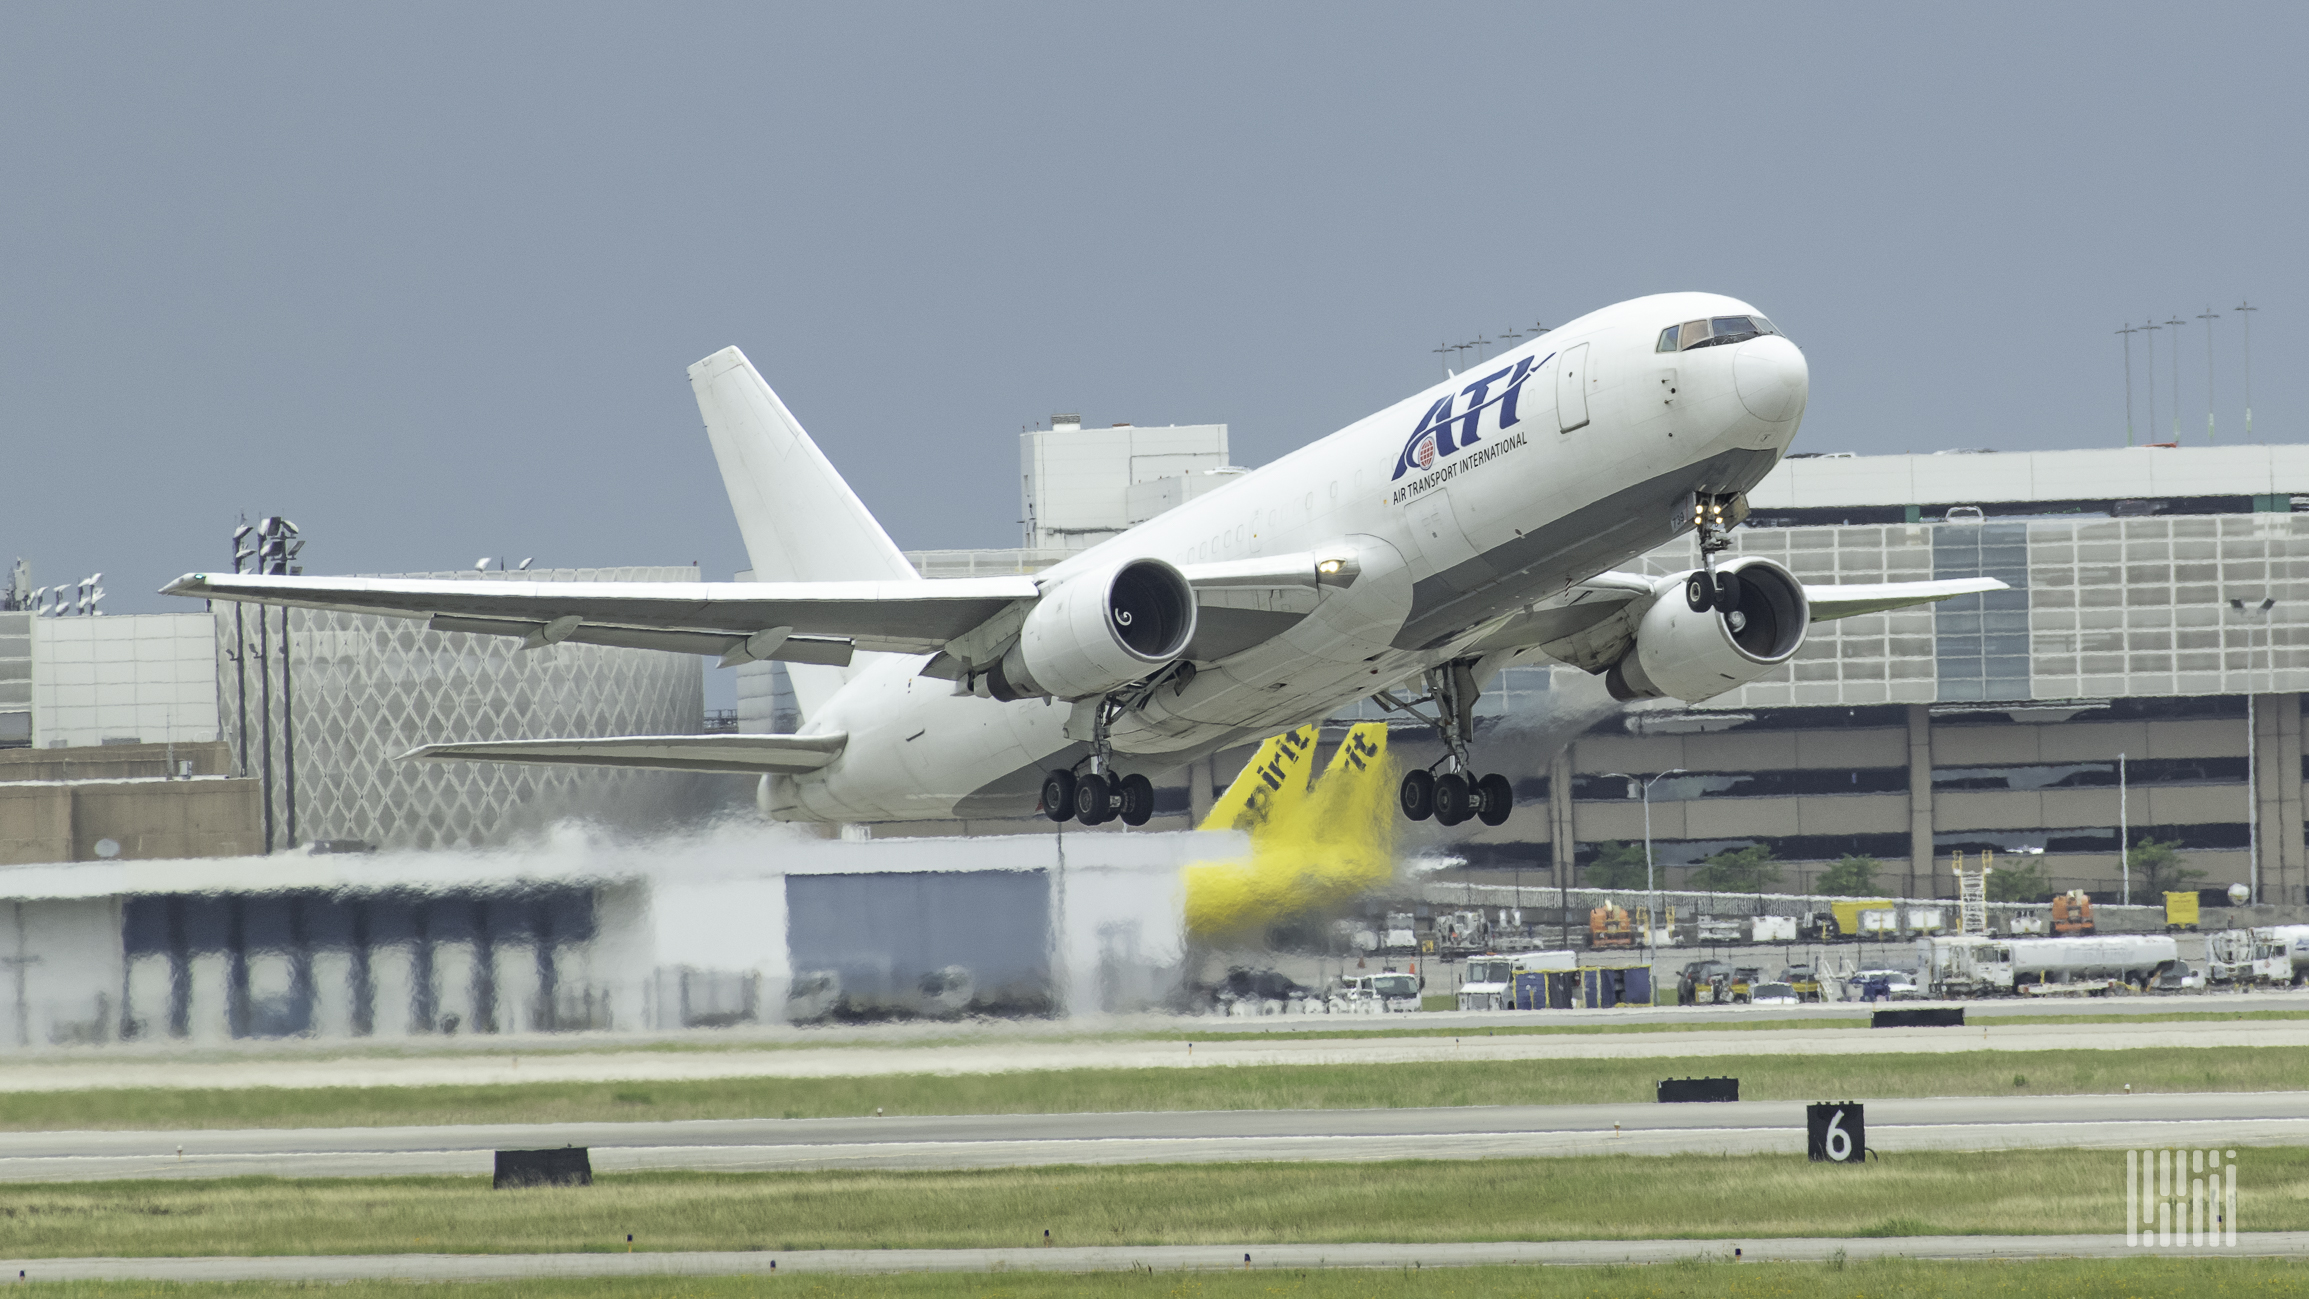 A big white jet with ATI lettering lifts off from runway.